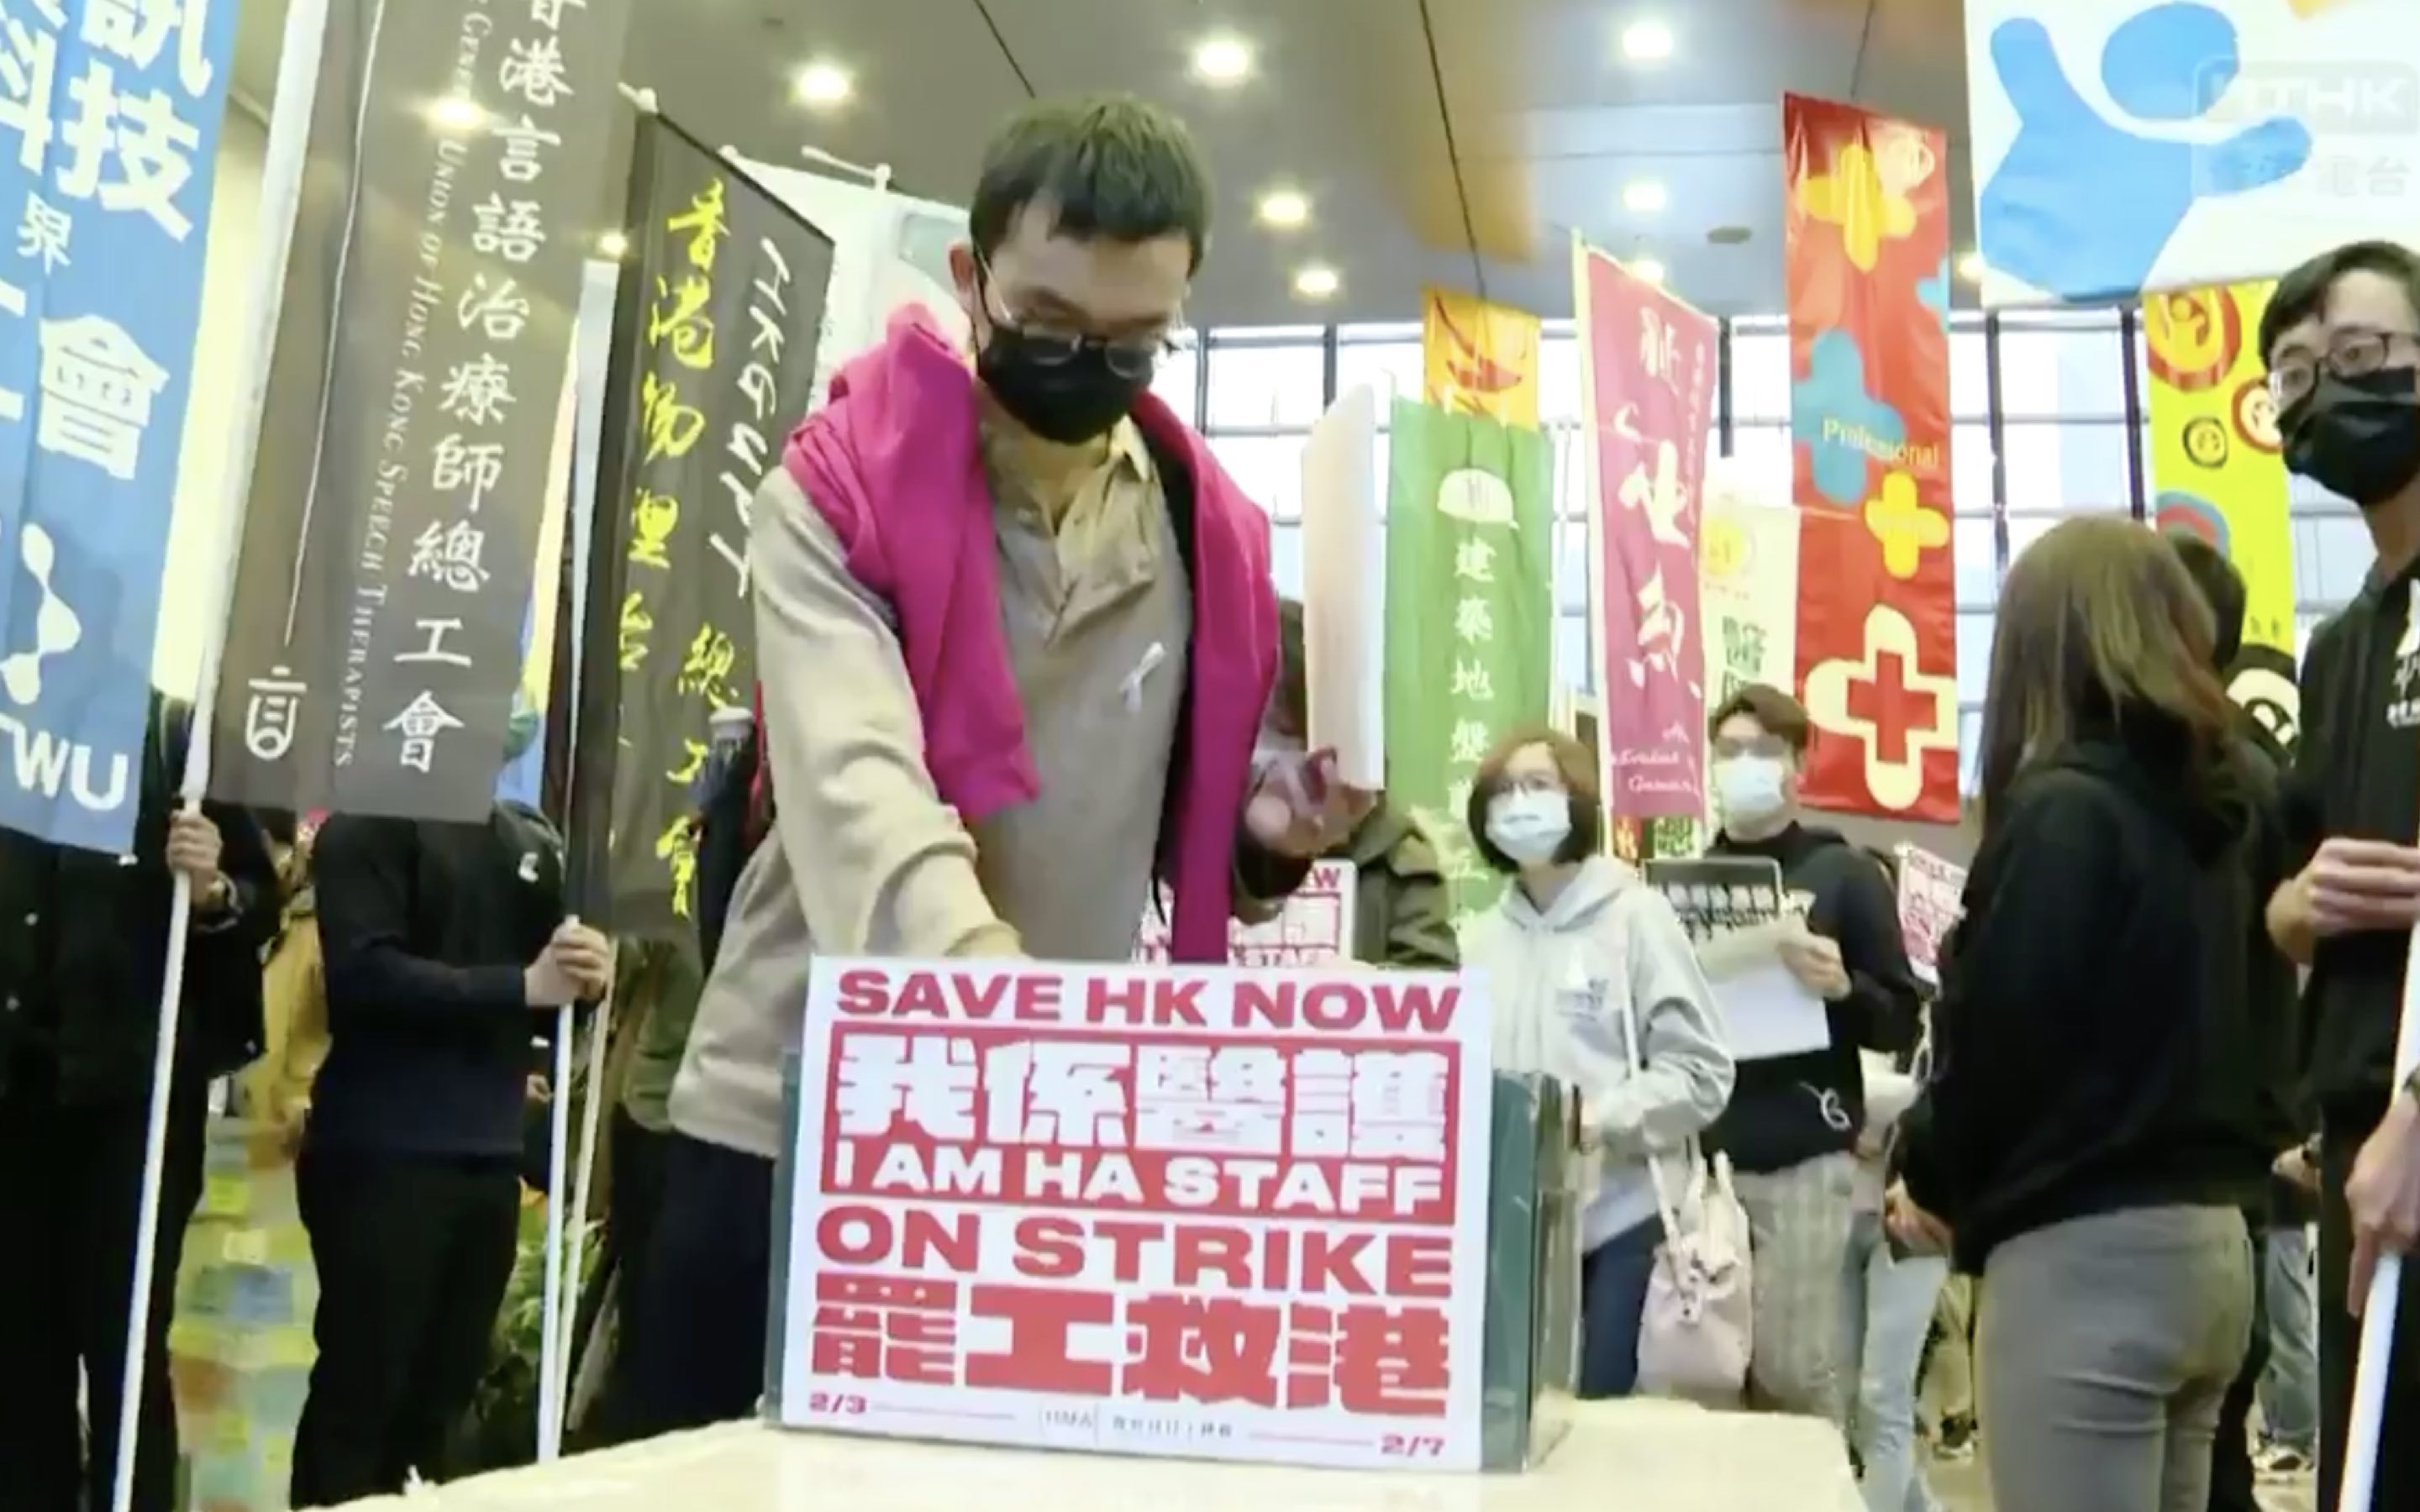 A striking healthcare worker puts a petition letter in a box, one of many to be delivered to the Hospital Authority. Screengrab via Facebook video/RTHK.